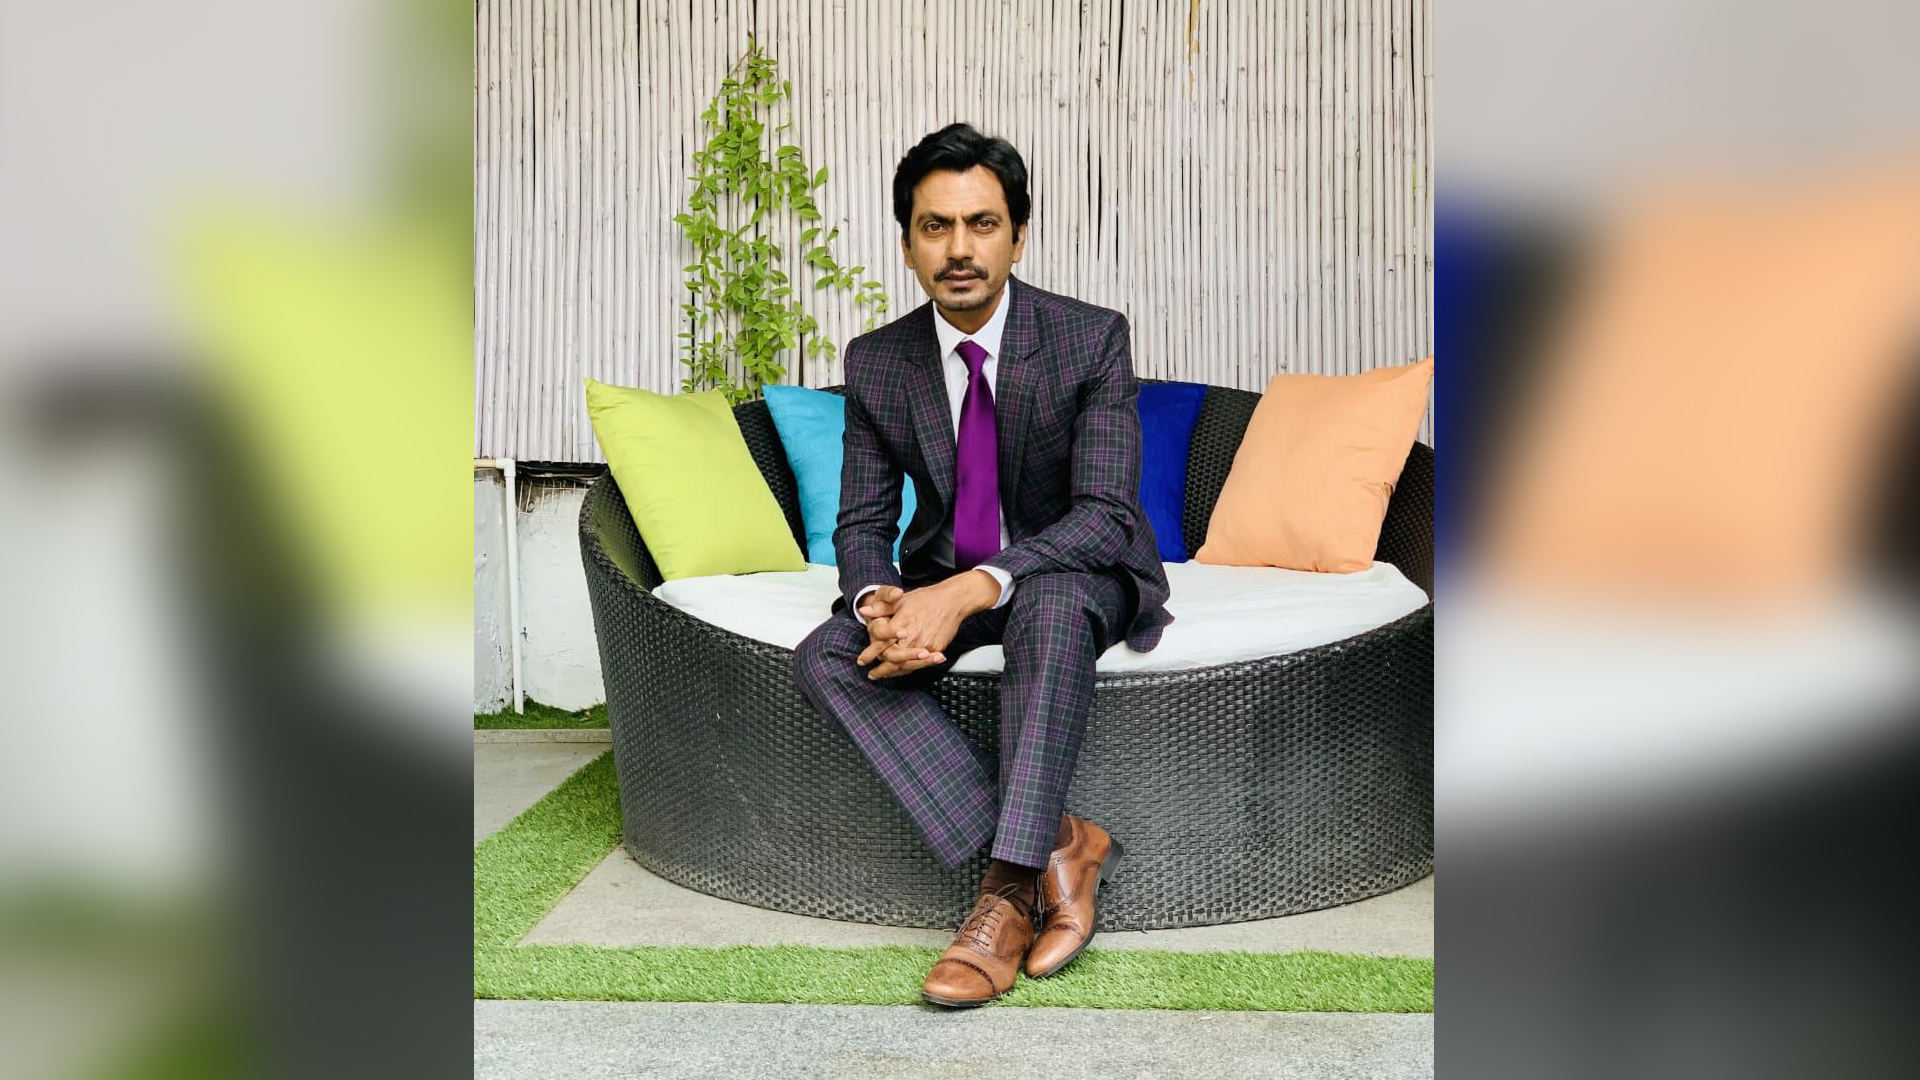 Nawazuddin Siddiqui roots for his co-stars and feels grateful for the learnings